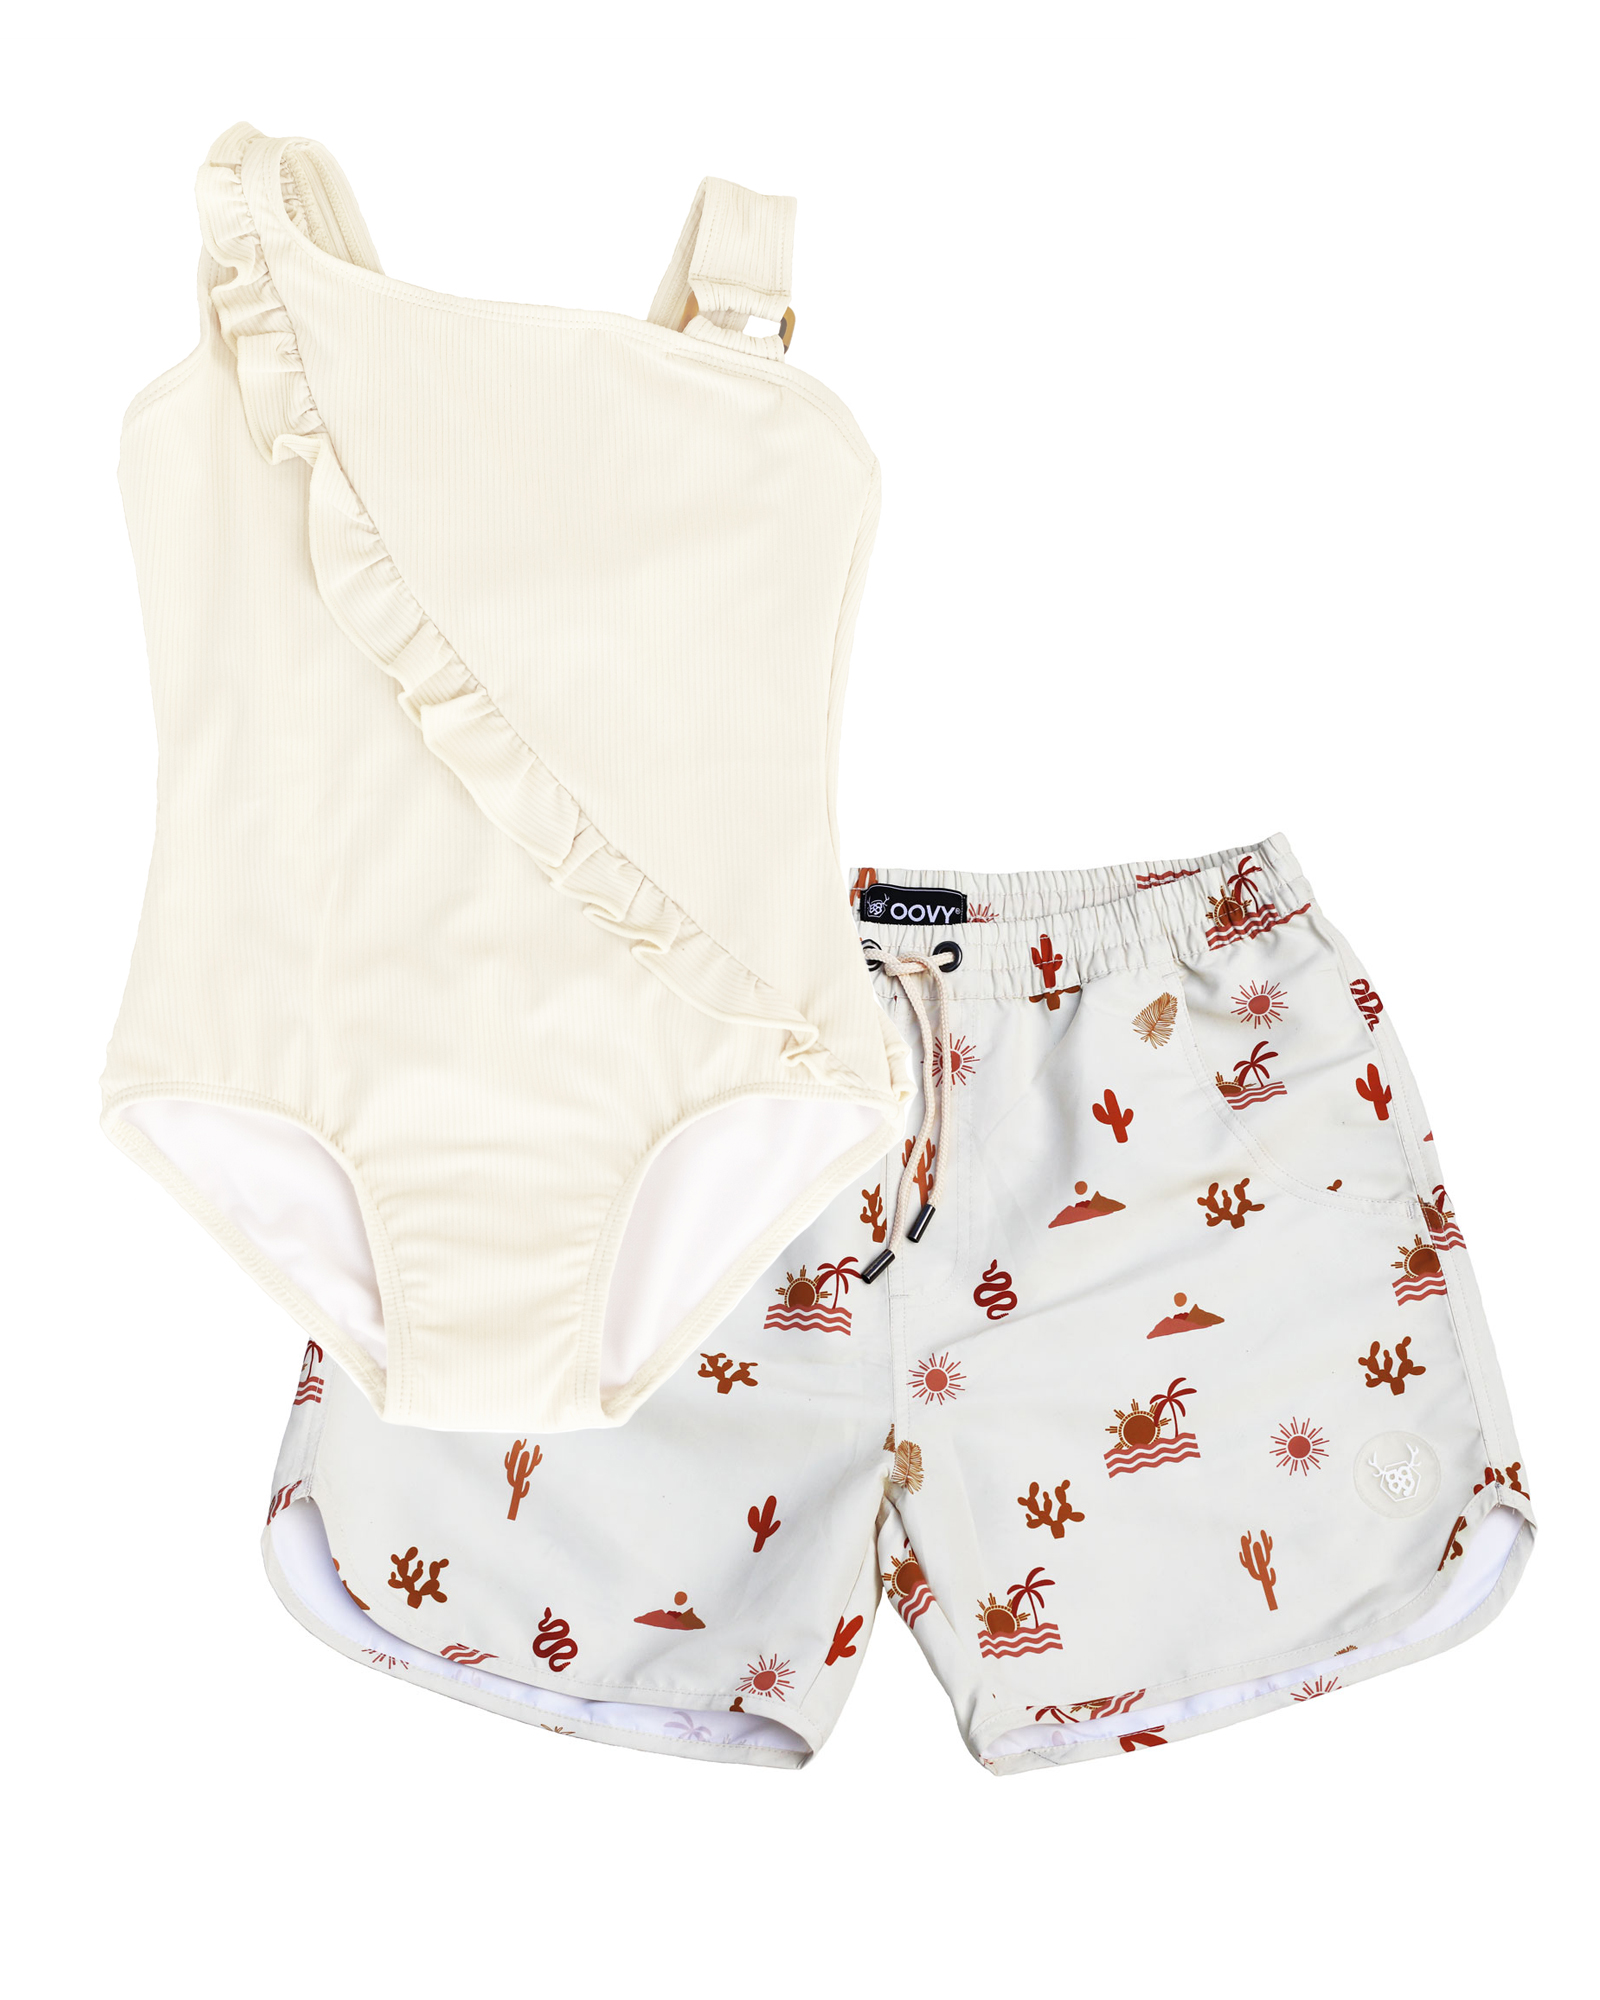 OOVY Father Oasis Boardshorts and Coconut Swimsuit Gift set